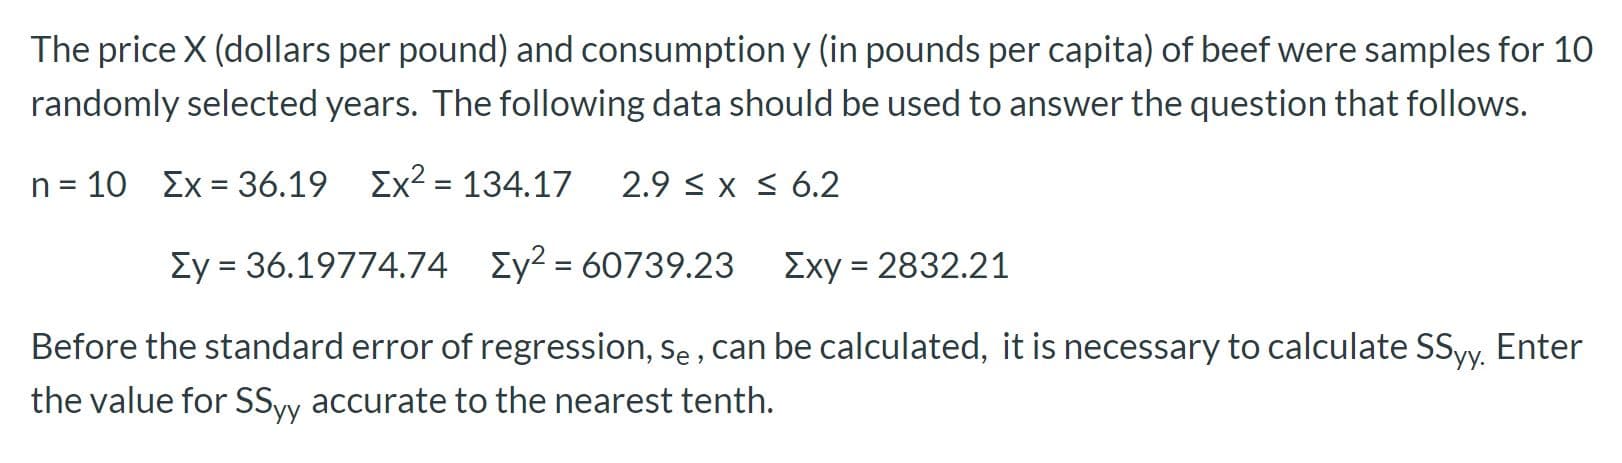 The price X (dollars per pound) and consumption y (in pounds per capita) of beef were samples for 10
randomly selected years. The following data should be used to answer the question that follows.
n = 10 Ex = 36.19 Ex2 = 134.17
2.9 < x S 6.2
Ey = 36.19774.74 Ey2 = 60739.23
Exy = 2832.21
%|
Before the standard error of regression, se , can be calculated, it is necessary to calculate SSyy. Enter
the value for SSyy accurate to the nearest tenth.
